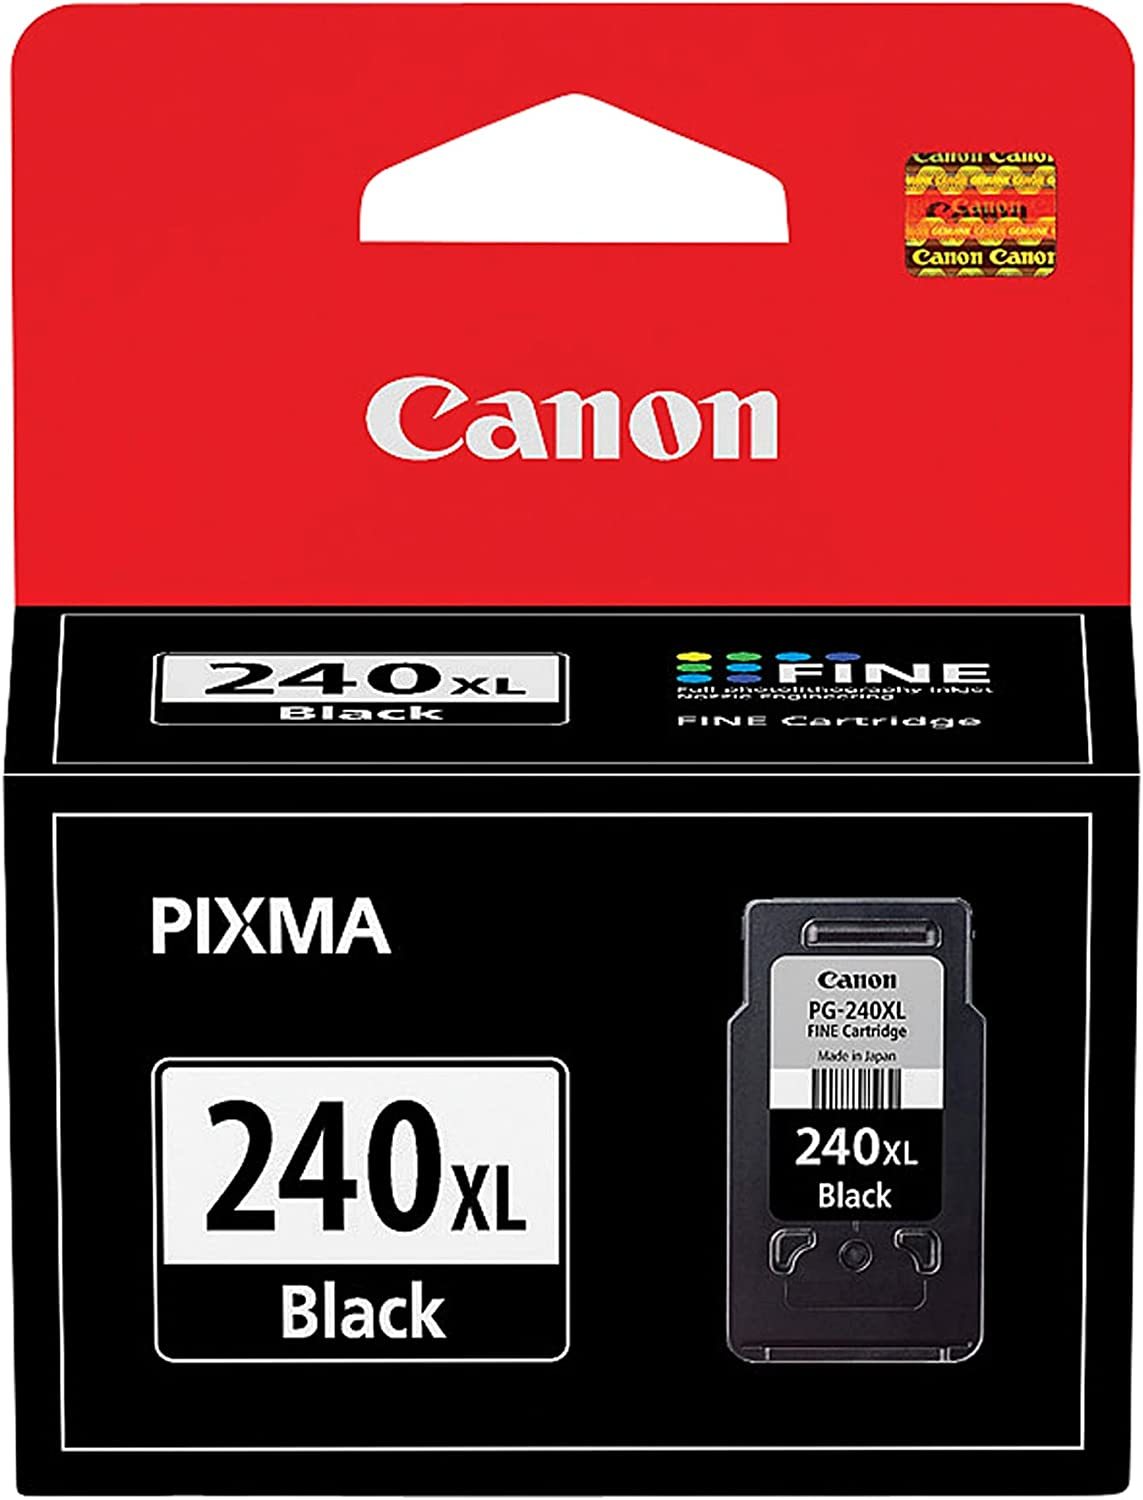 Primary image for Chromalife 100 Black Ink Cartridge (5206B001) For The Canon Pg-240Xl.